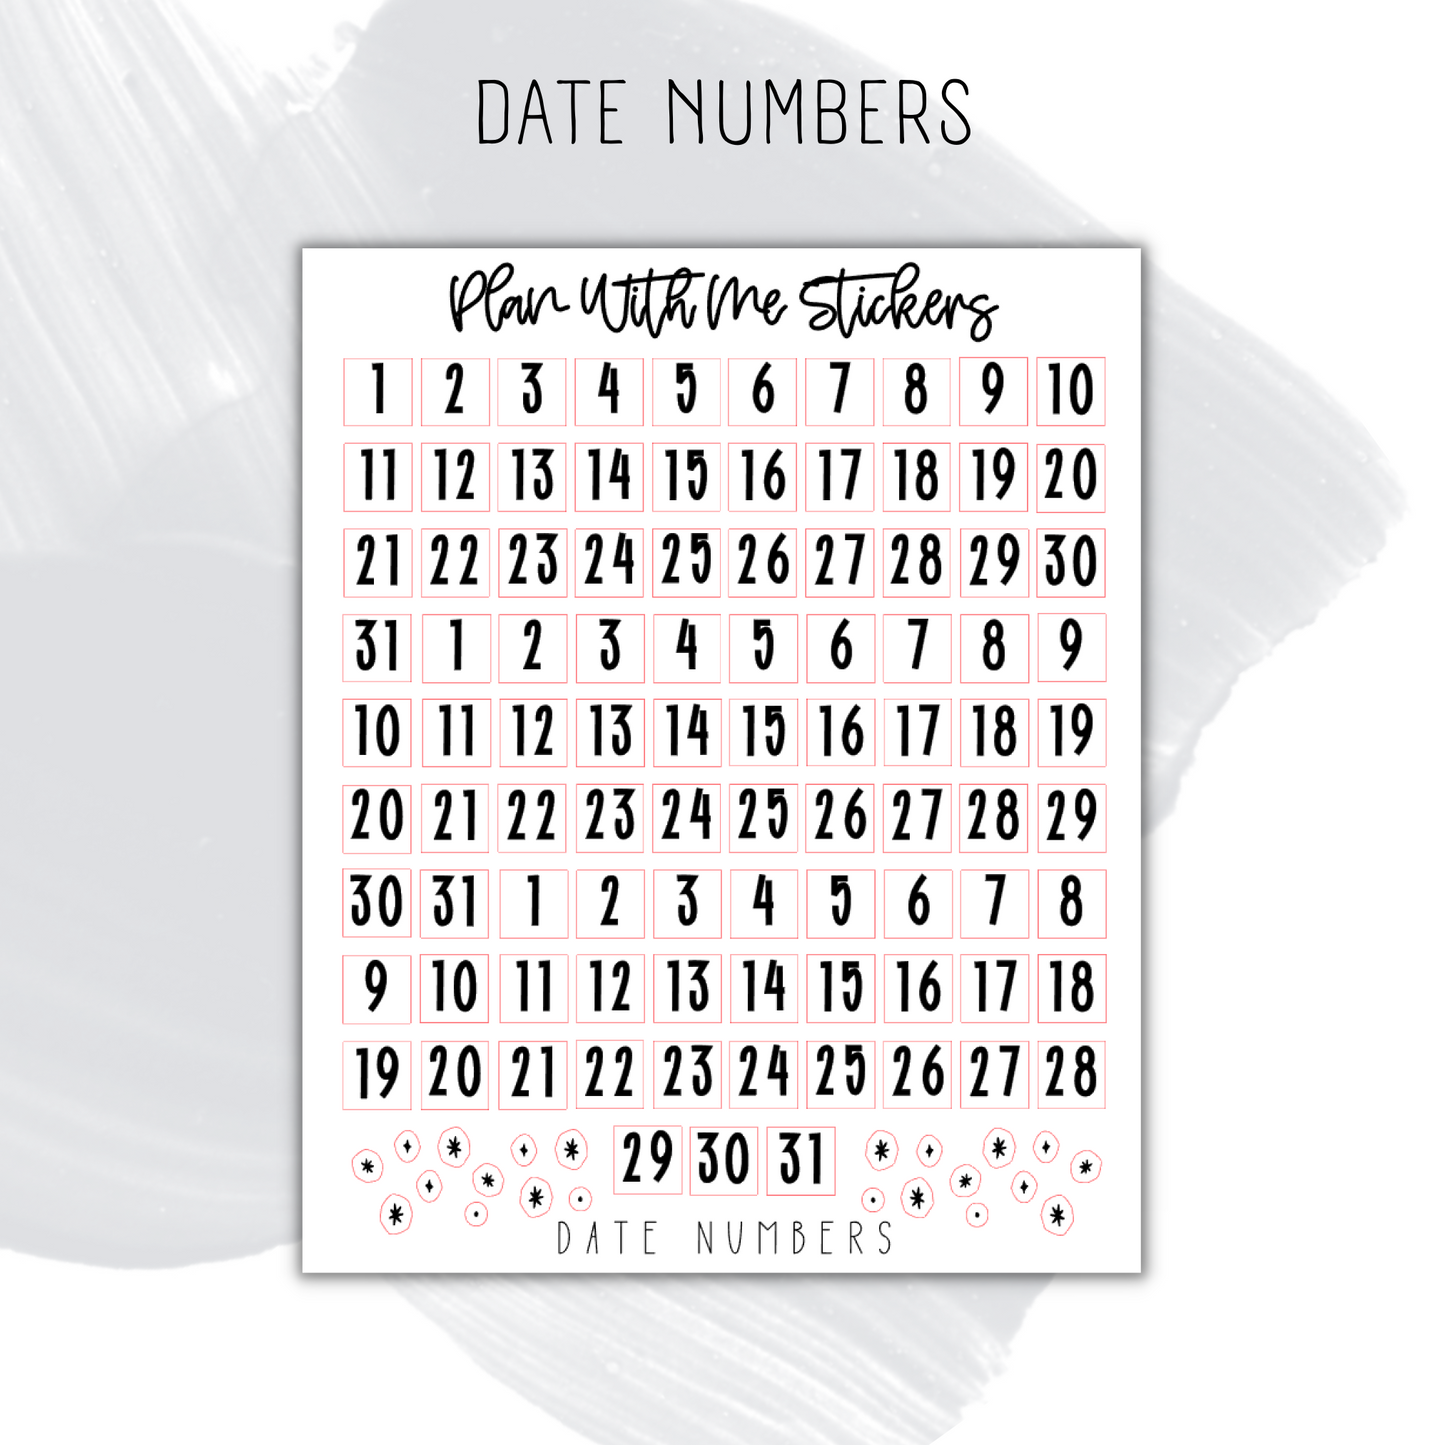 Date Numbers